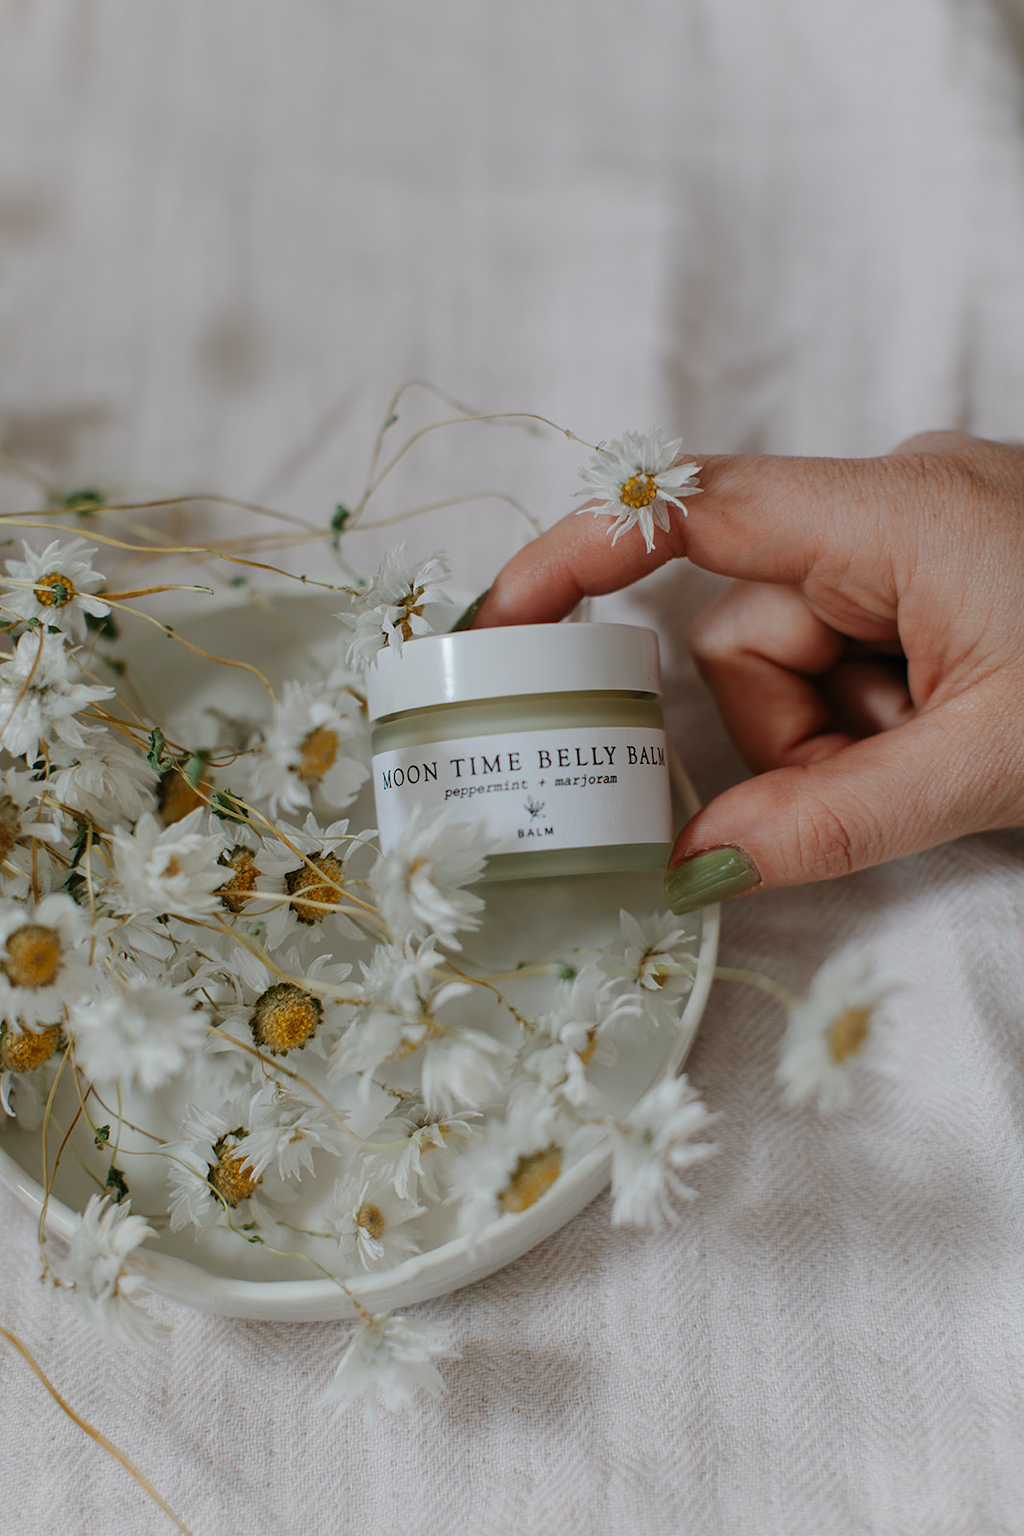 Forage Botanicals Moon Time Belly Balm. Natural menstrual pain relief. A person is tilting the jar up label forward on a small white ceramic plate next to a bunch of daisies.